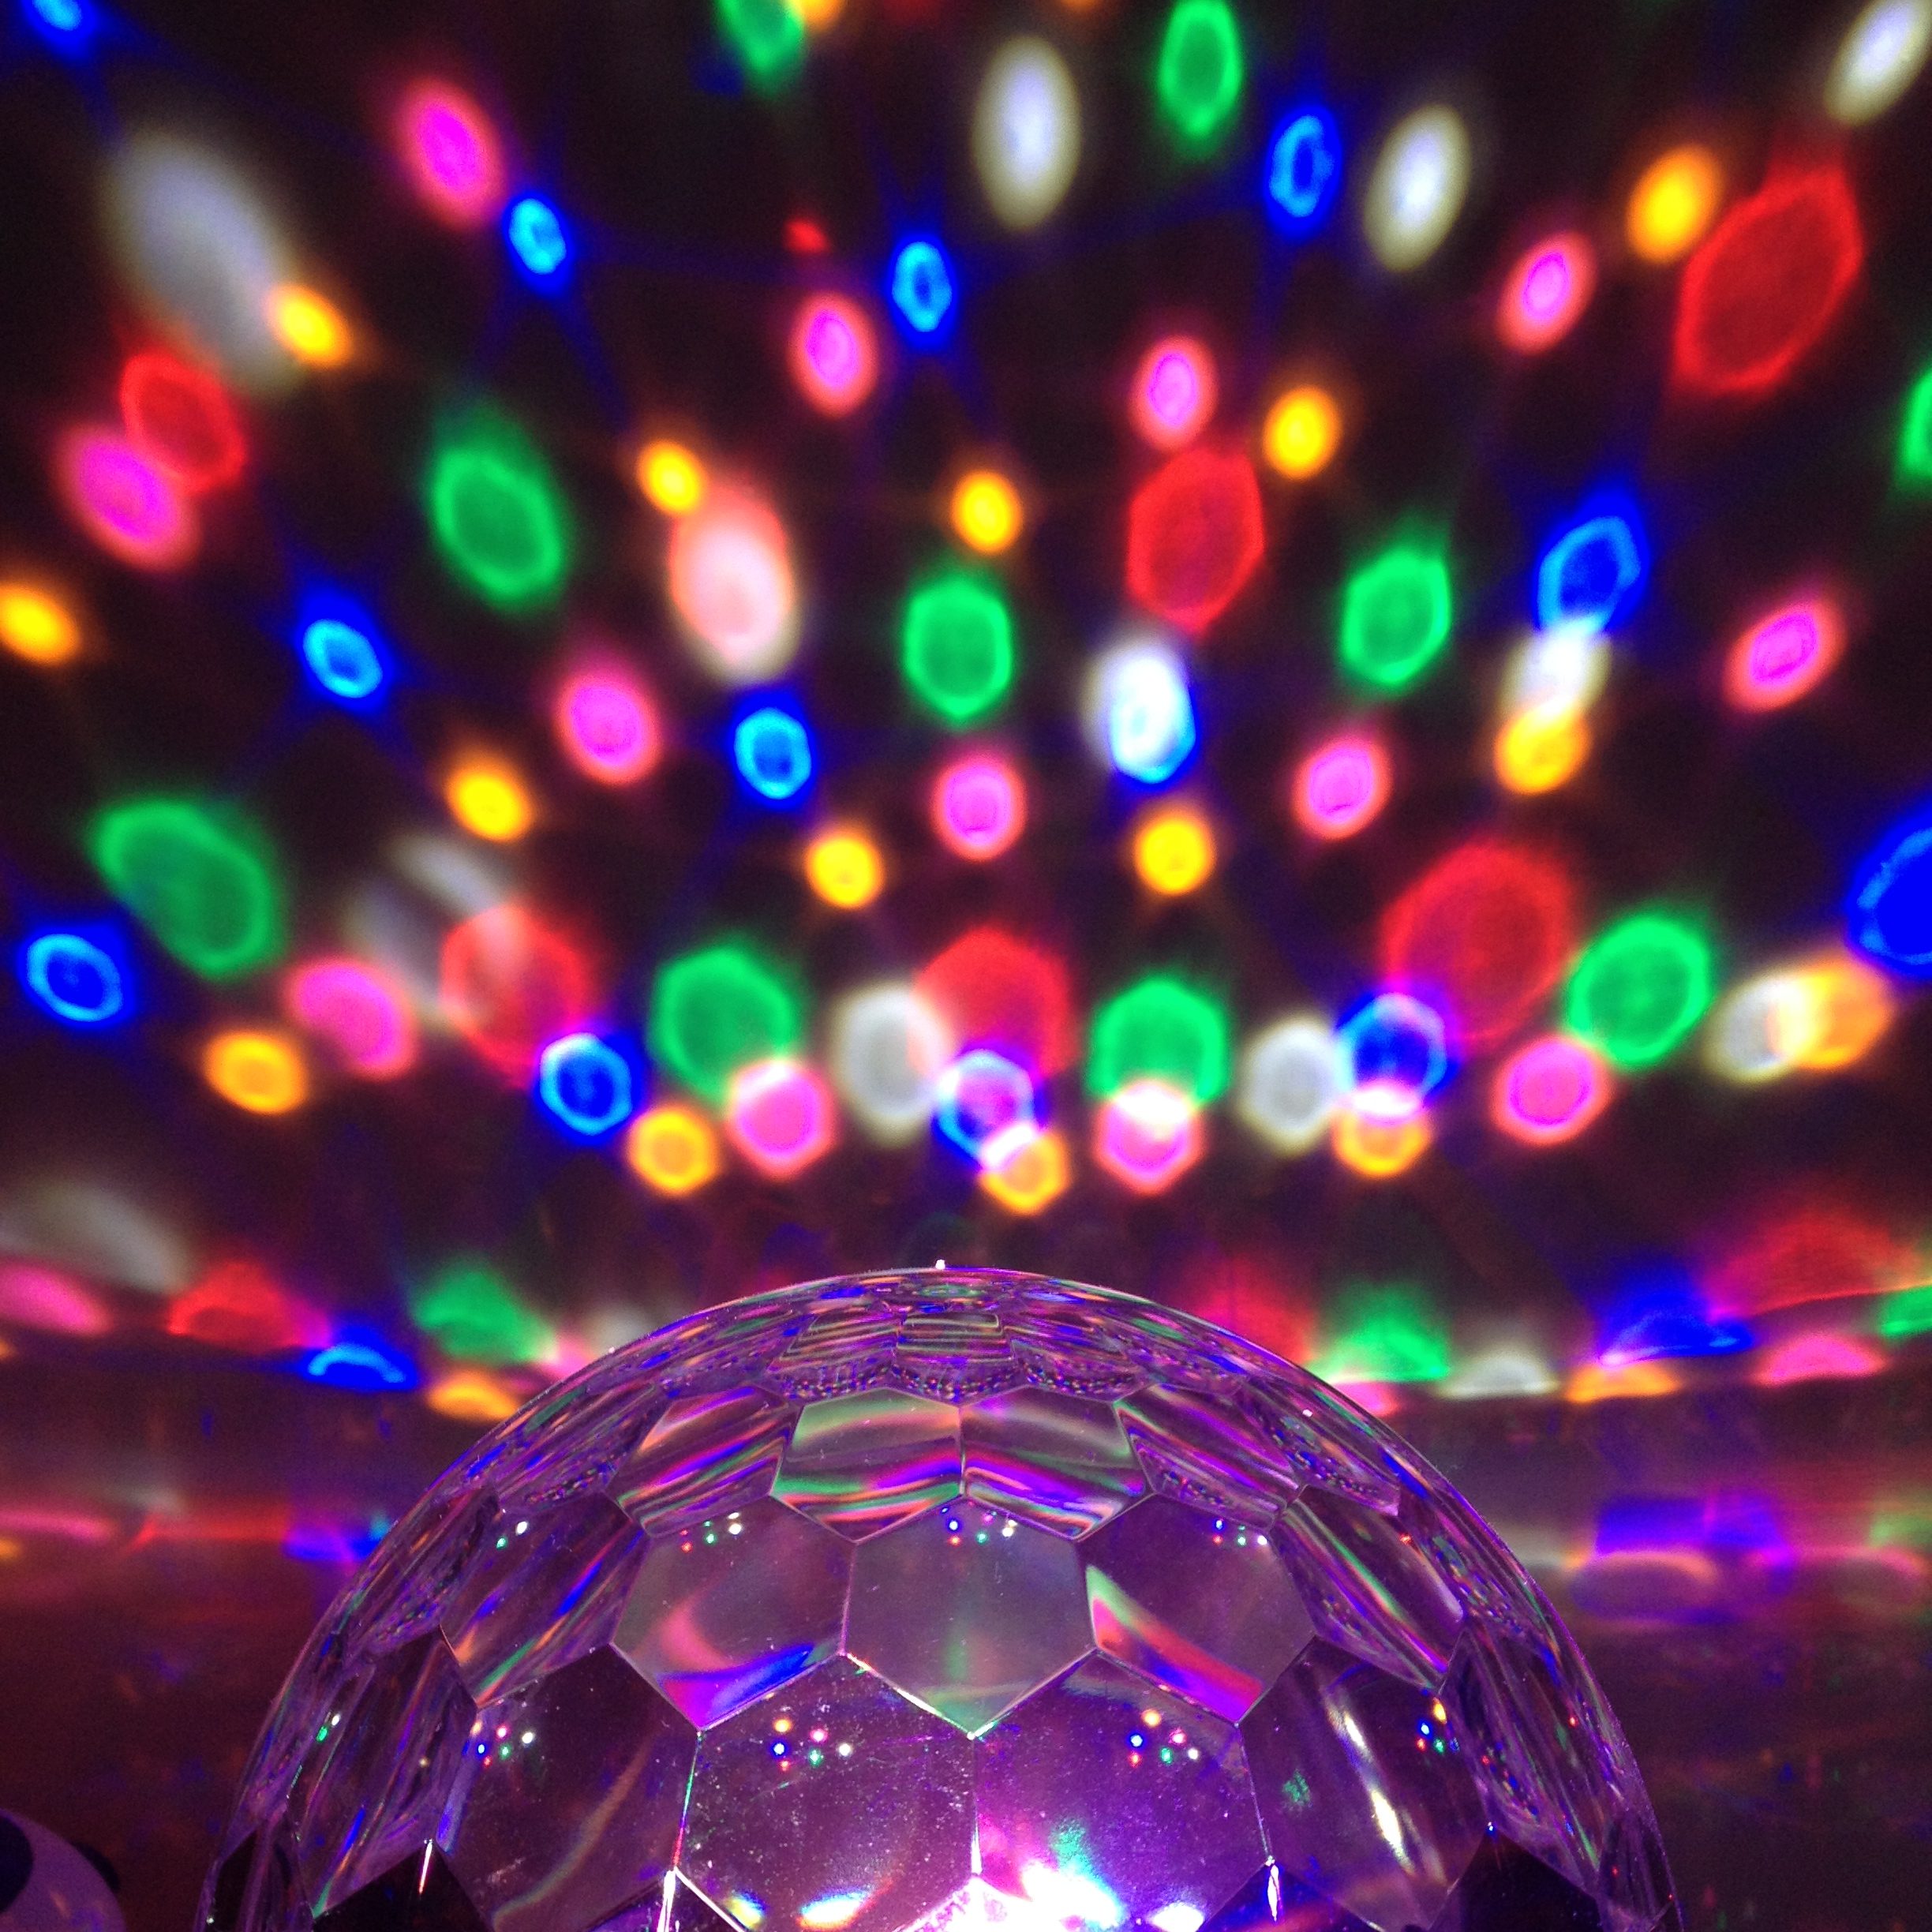 Disco ball light projecting coloured spots onto the wall